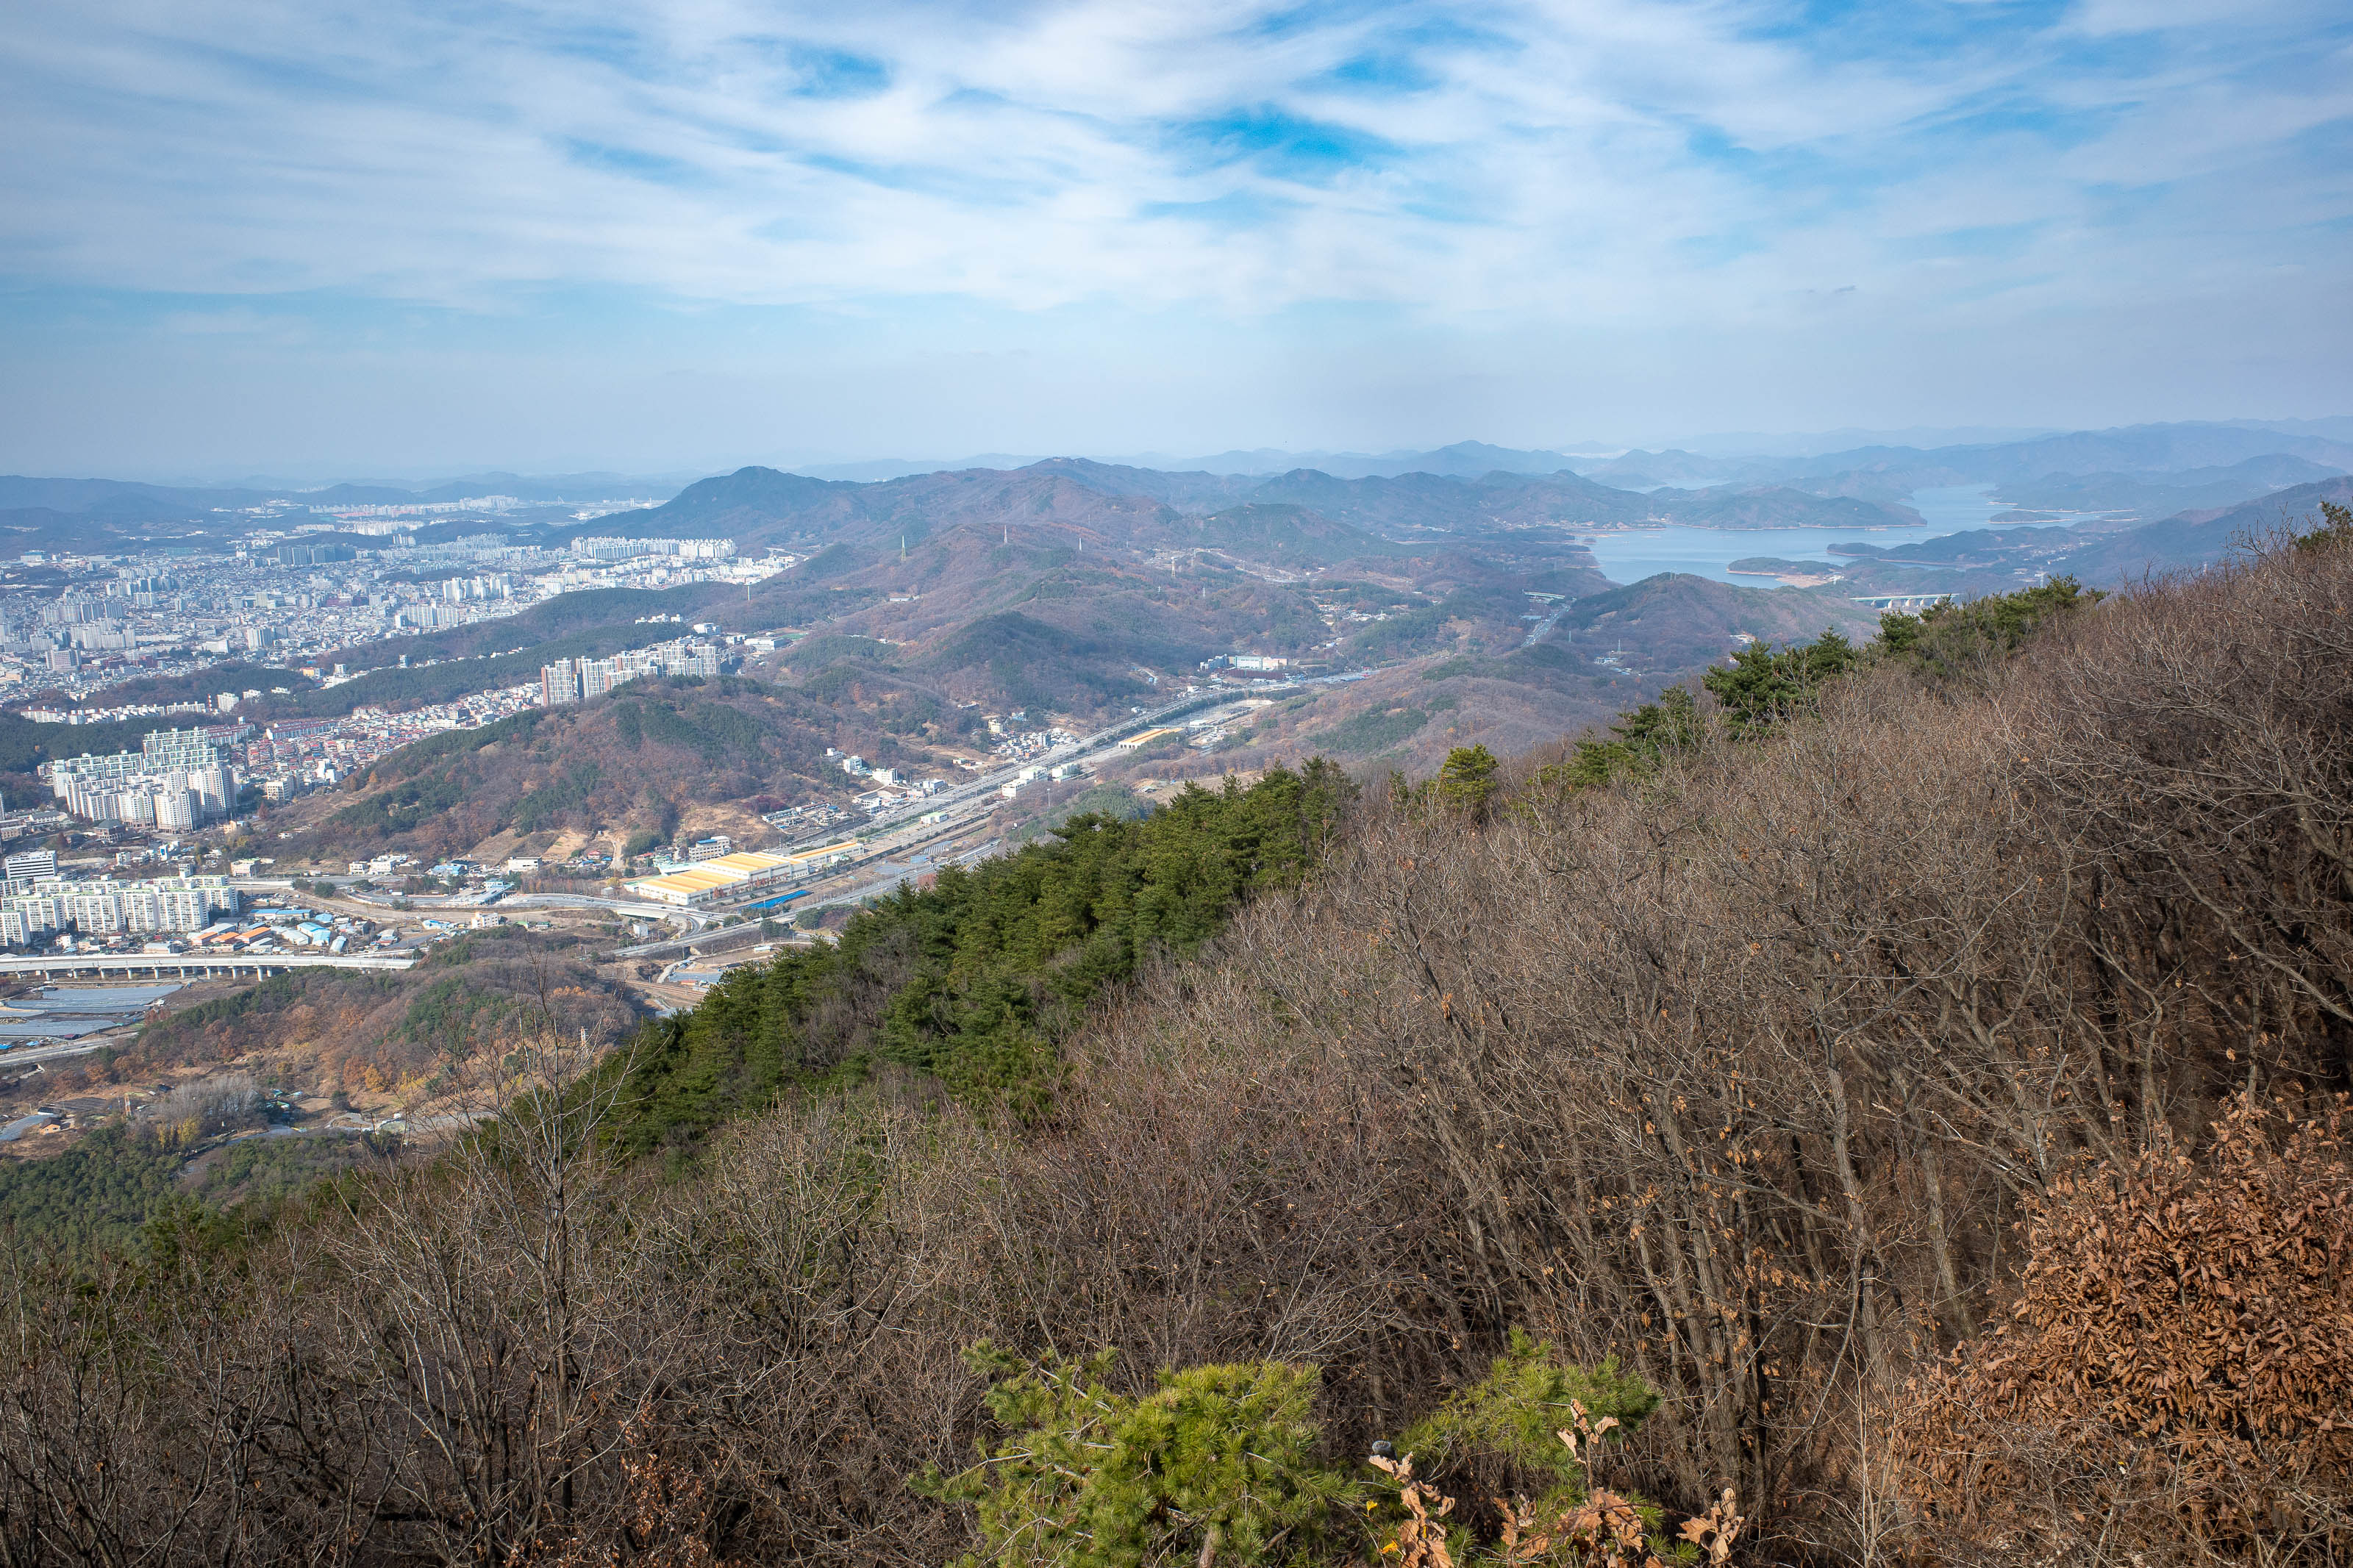 Korean-Hiking-Daejeon-Bomunsan - View in another direction, that lake looks interesting... Somewhere in those hills is the pilgrimage clay road I walked a lap of last time. I did it w